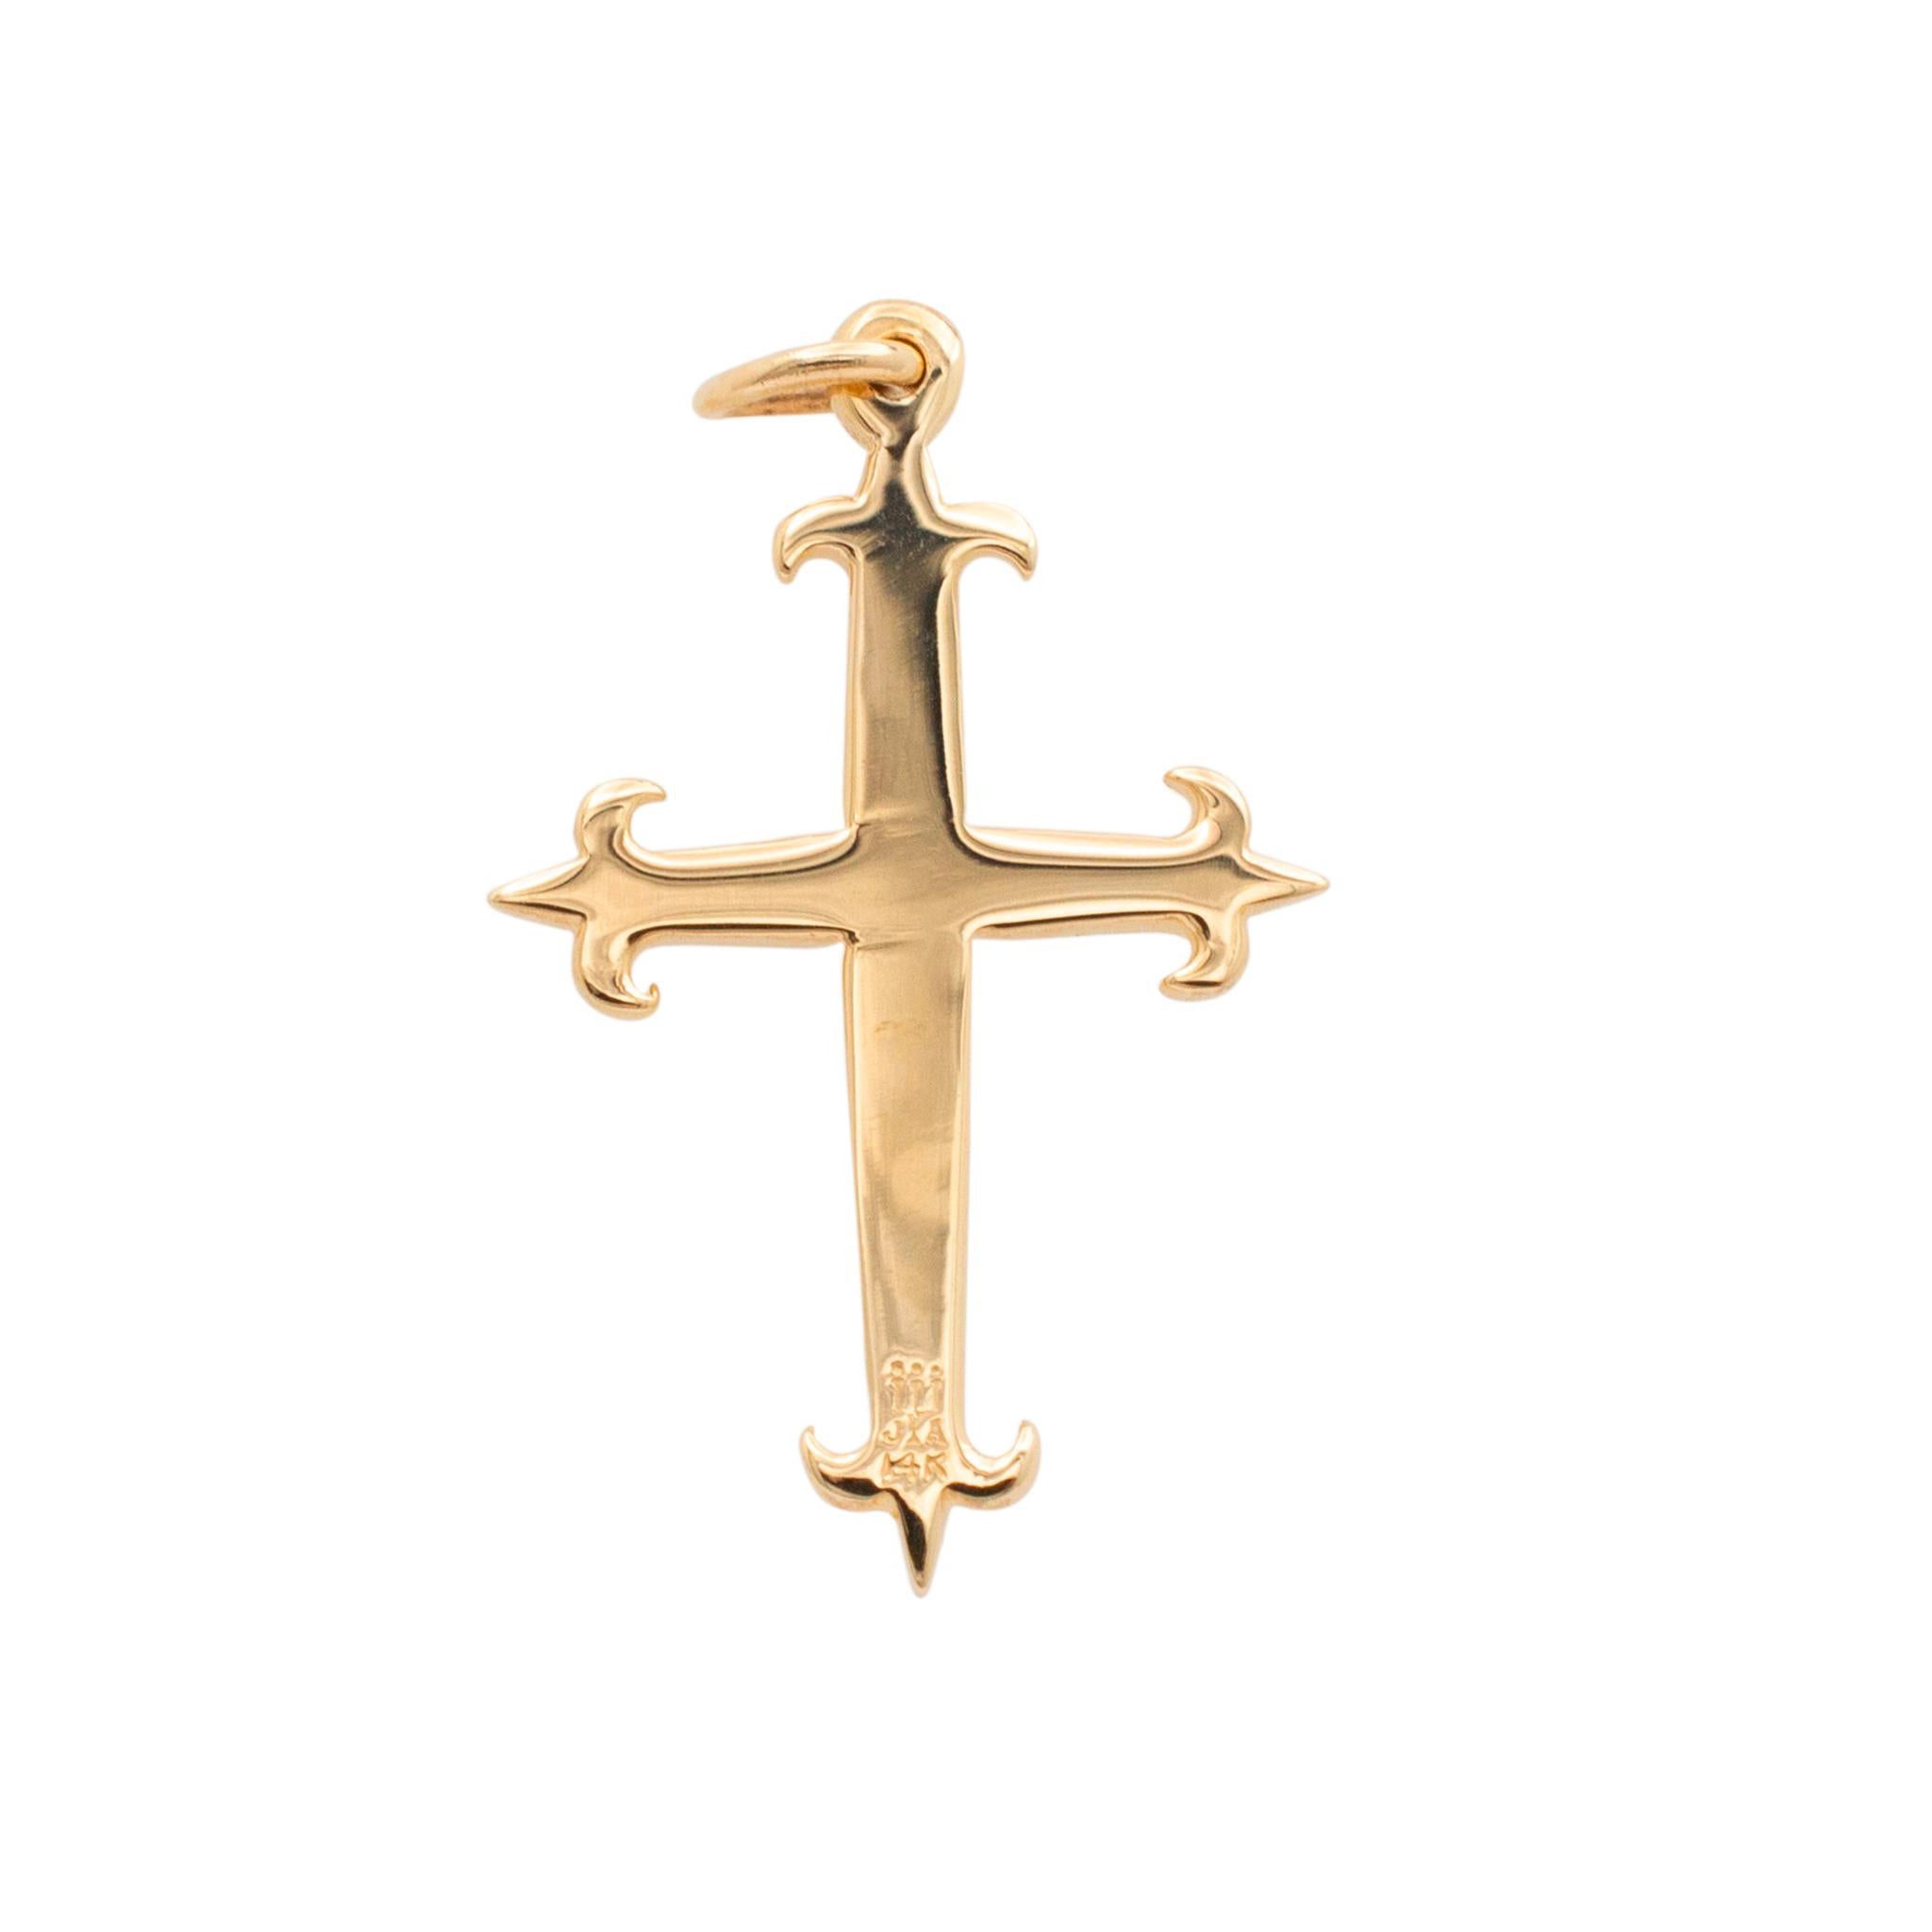 Brand: James Avery

Gender: Unisex

Metal Type: 14K Yellow Gold

Length: 30.00 mm

Width: 20.00 mm

Weight: 2.30 grams

14K yellow gold religious slider pendant. Stamped 